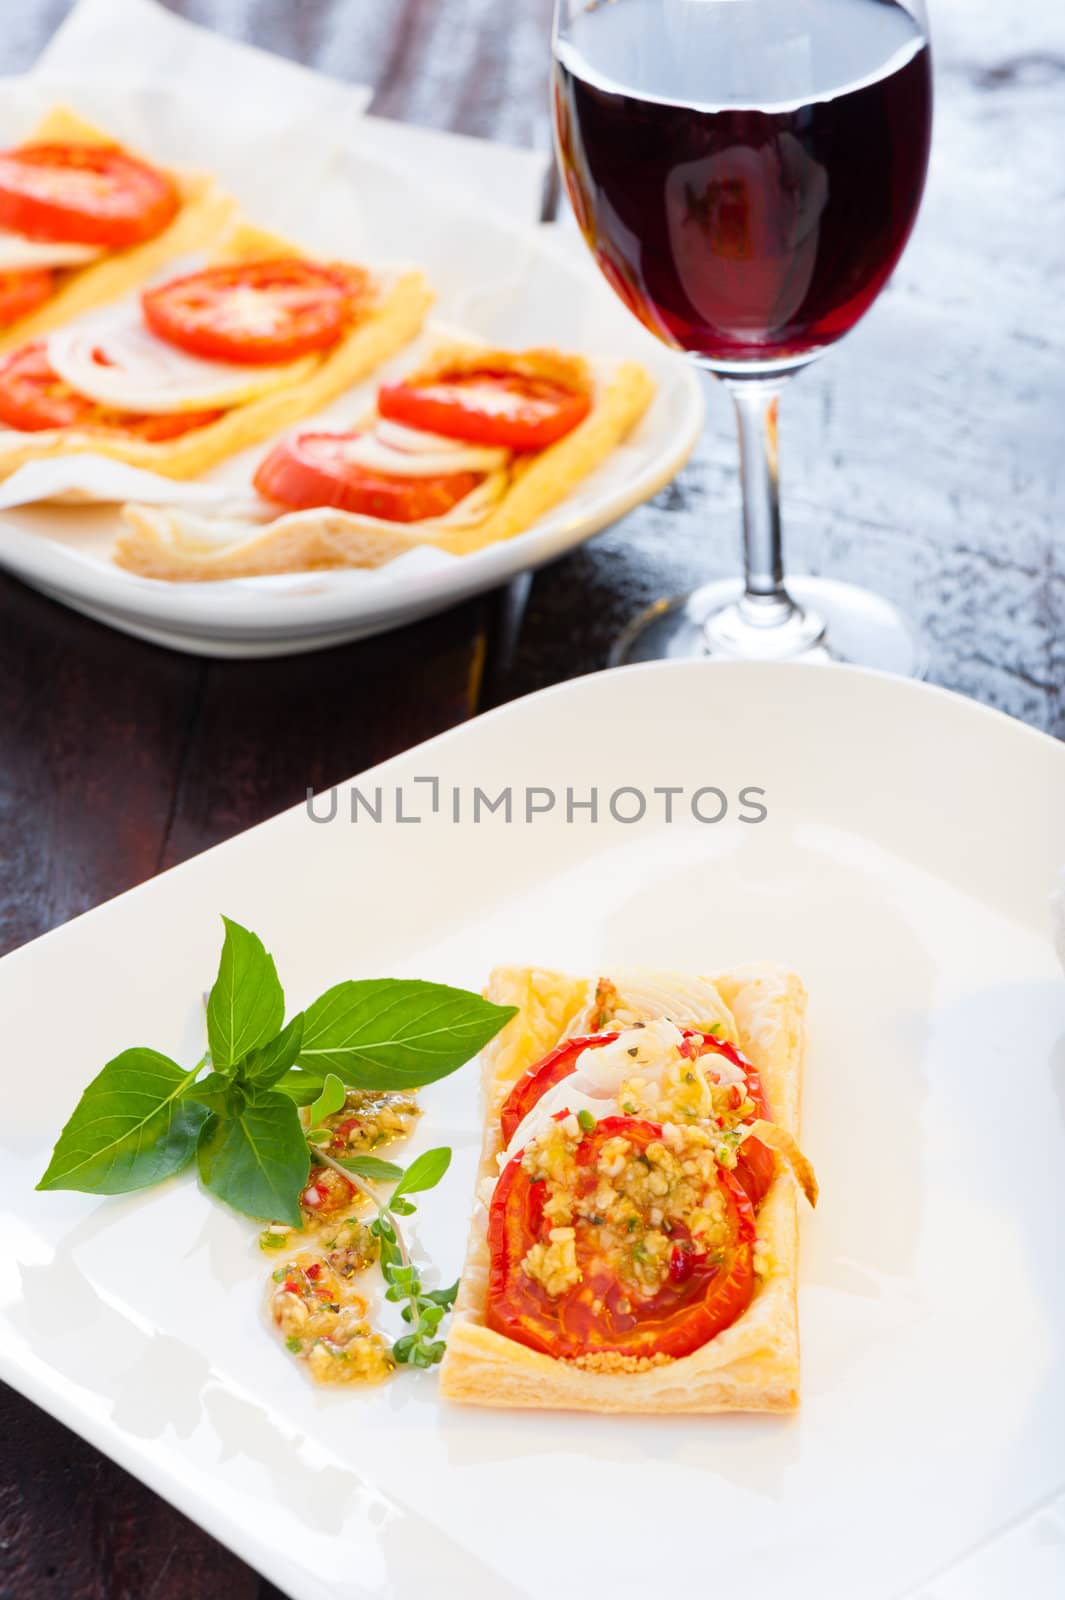 A small piece of mini pizza with some herbs on white plate and a glass of red wine in the background